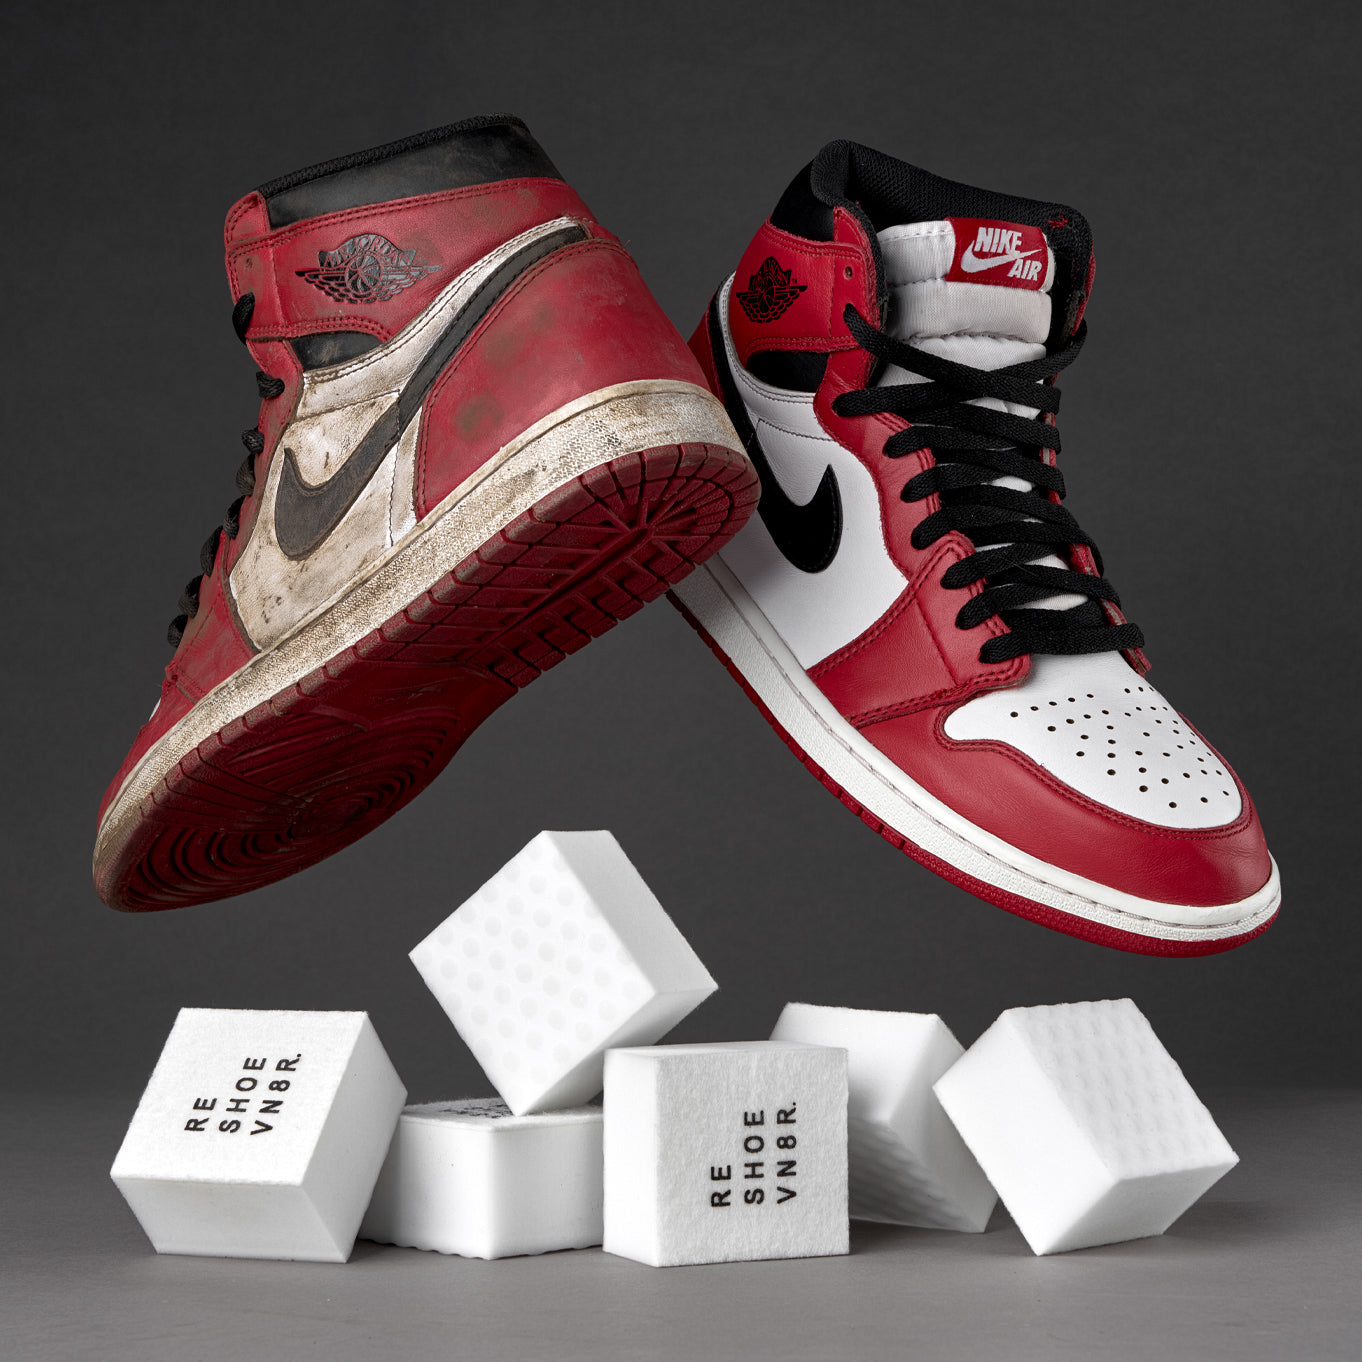 A pair of red, black and white Nike Air Jordan 1 sneakers floating in mid air next to a stack of white shoe cleaning sponges on dark grey background. The text "NIKE AIR" is visible on the side of the sneakers. Cleaning sponges have black text print that reads "RESHOEVN8R". One shoe is visibily dirty, and the other is clean.